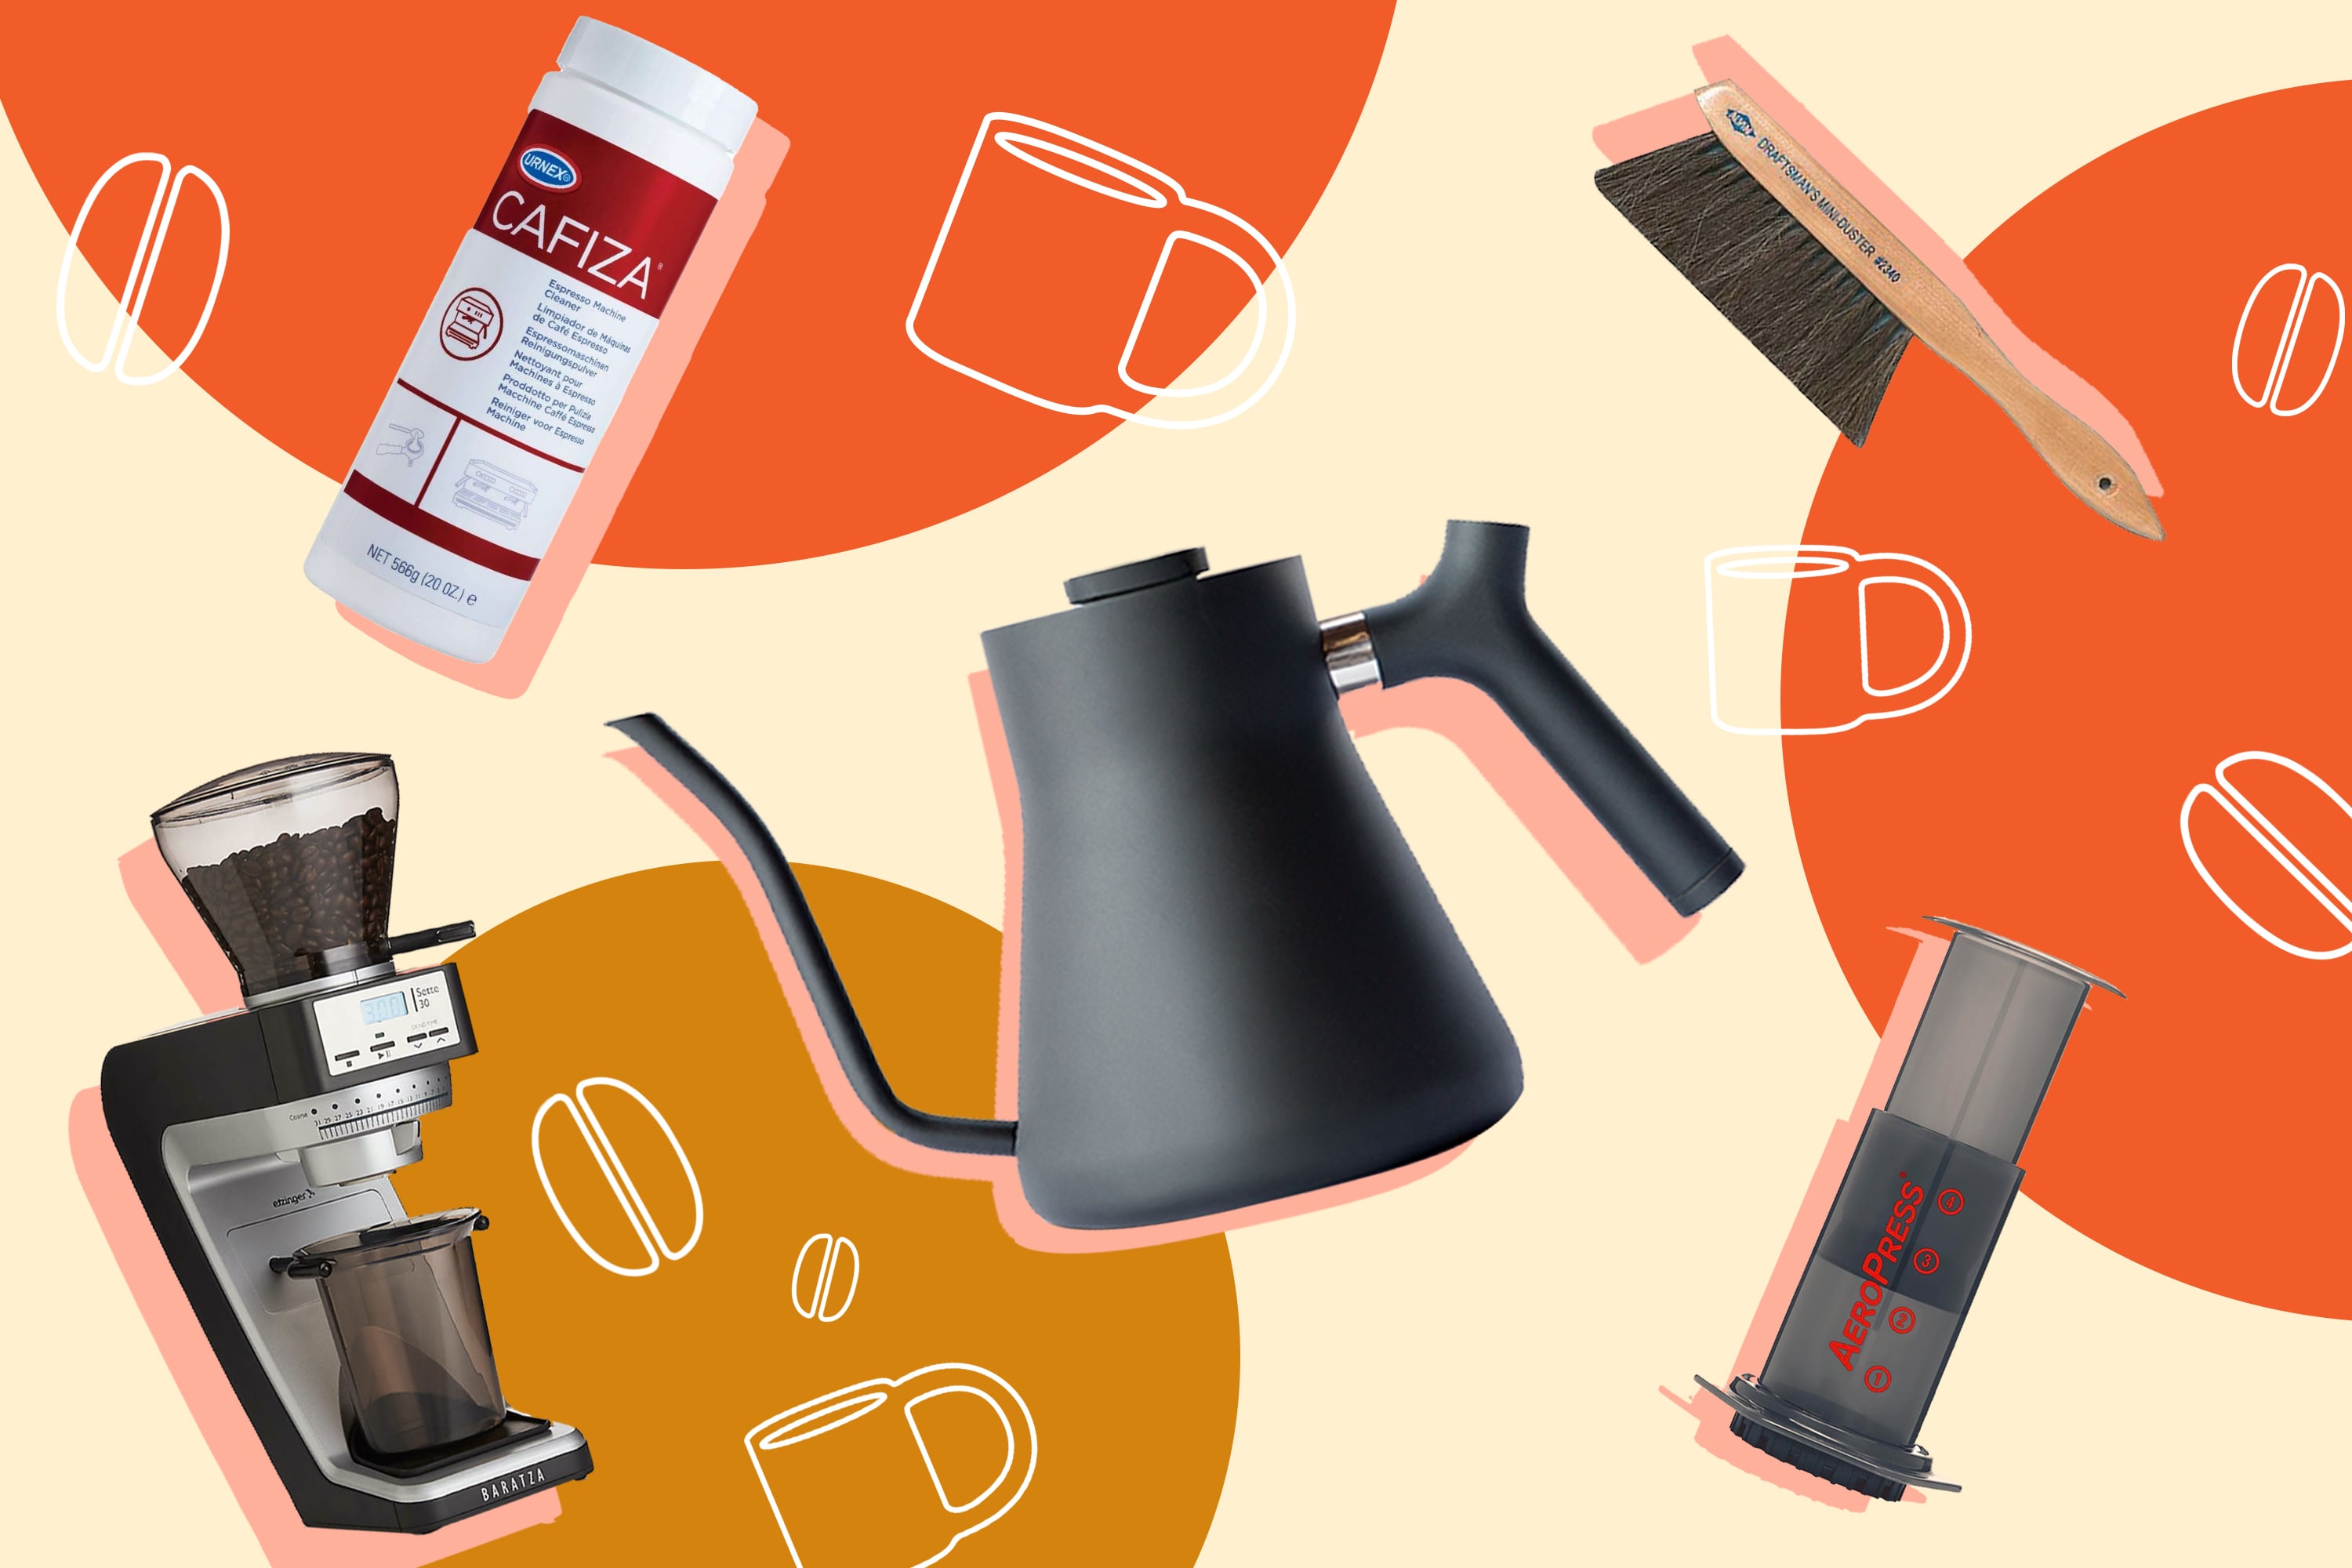 Coffee Tools For Upgrading Your At-Home Coffee Routine - Forbes Vetted